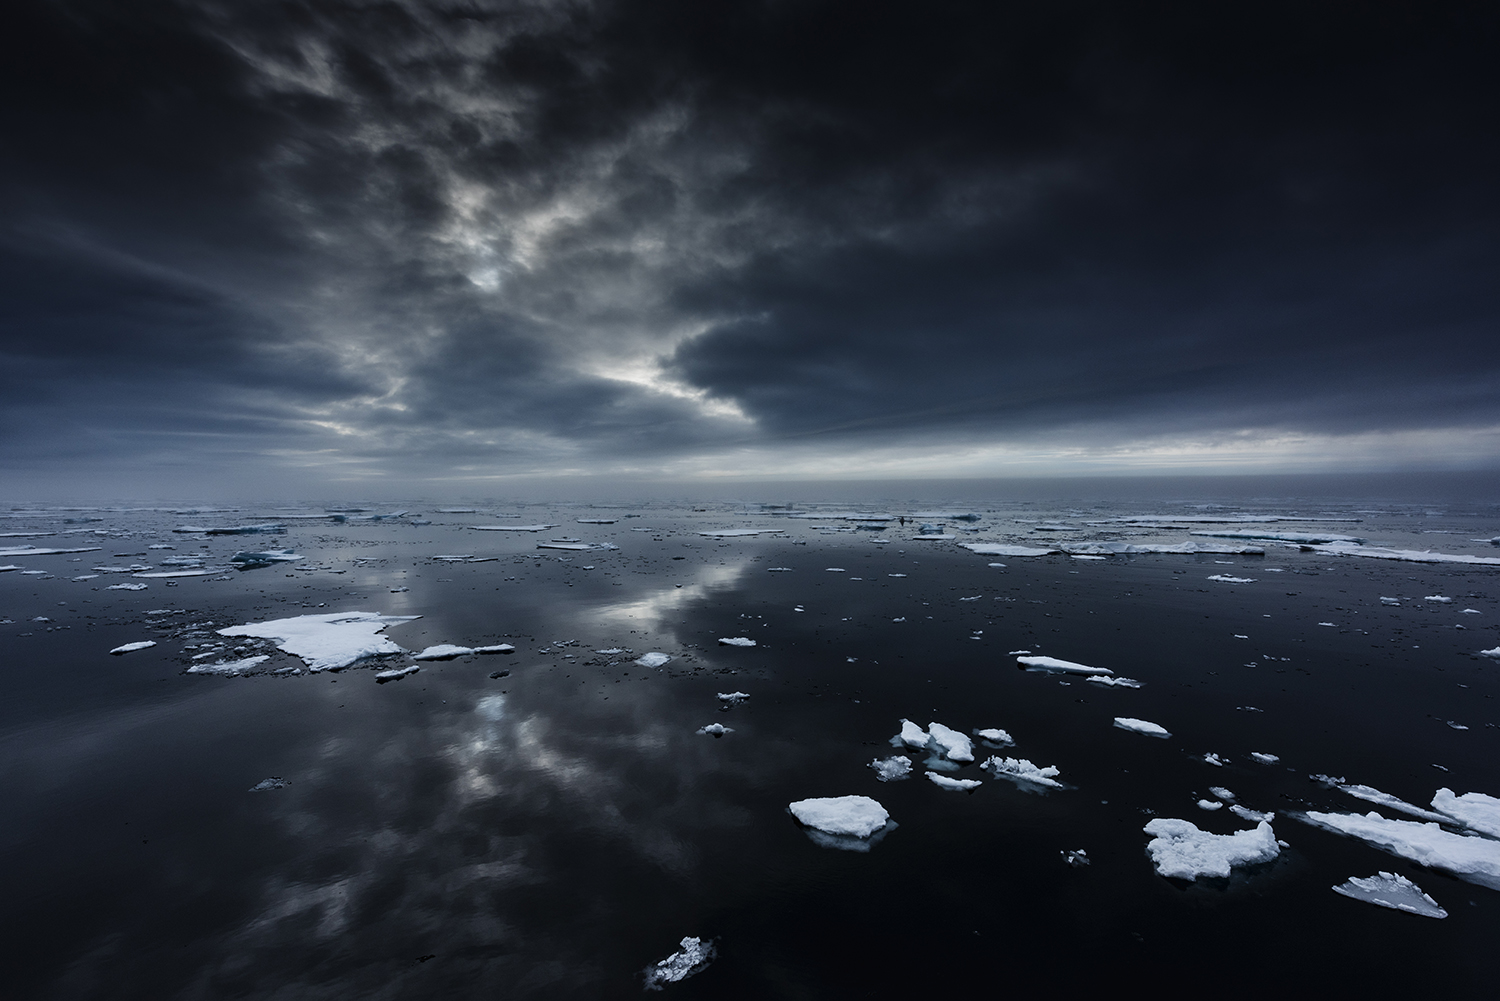 The extent of the Arctic pack ice, Greenland Sea, Northeast Coast of Greenland. Temperatures rise faster in the Arctic than anywhere else, and while scientists are warning of the mounting risks of climate change, oil companies regards the decline of sea ice as a new business opportunity.